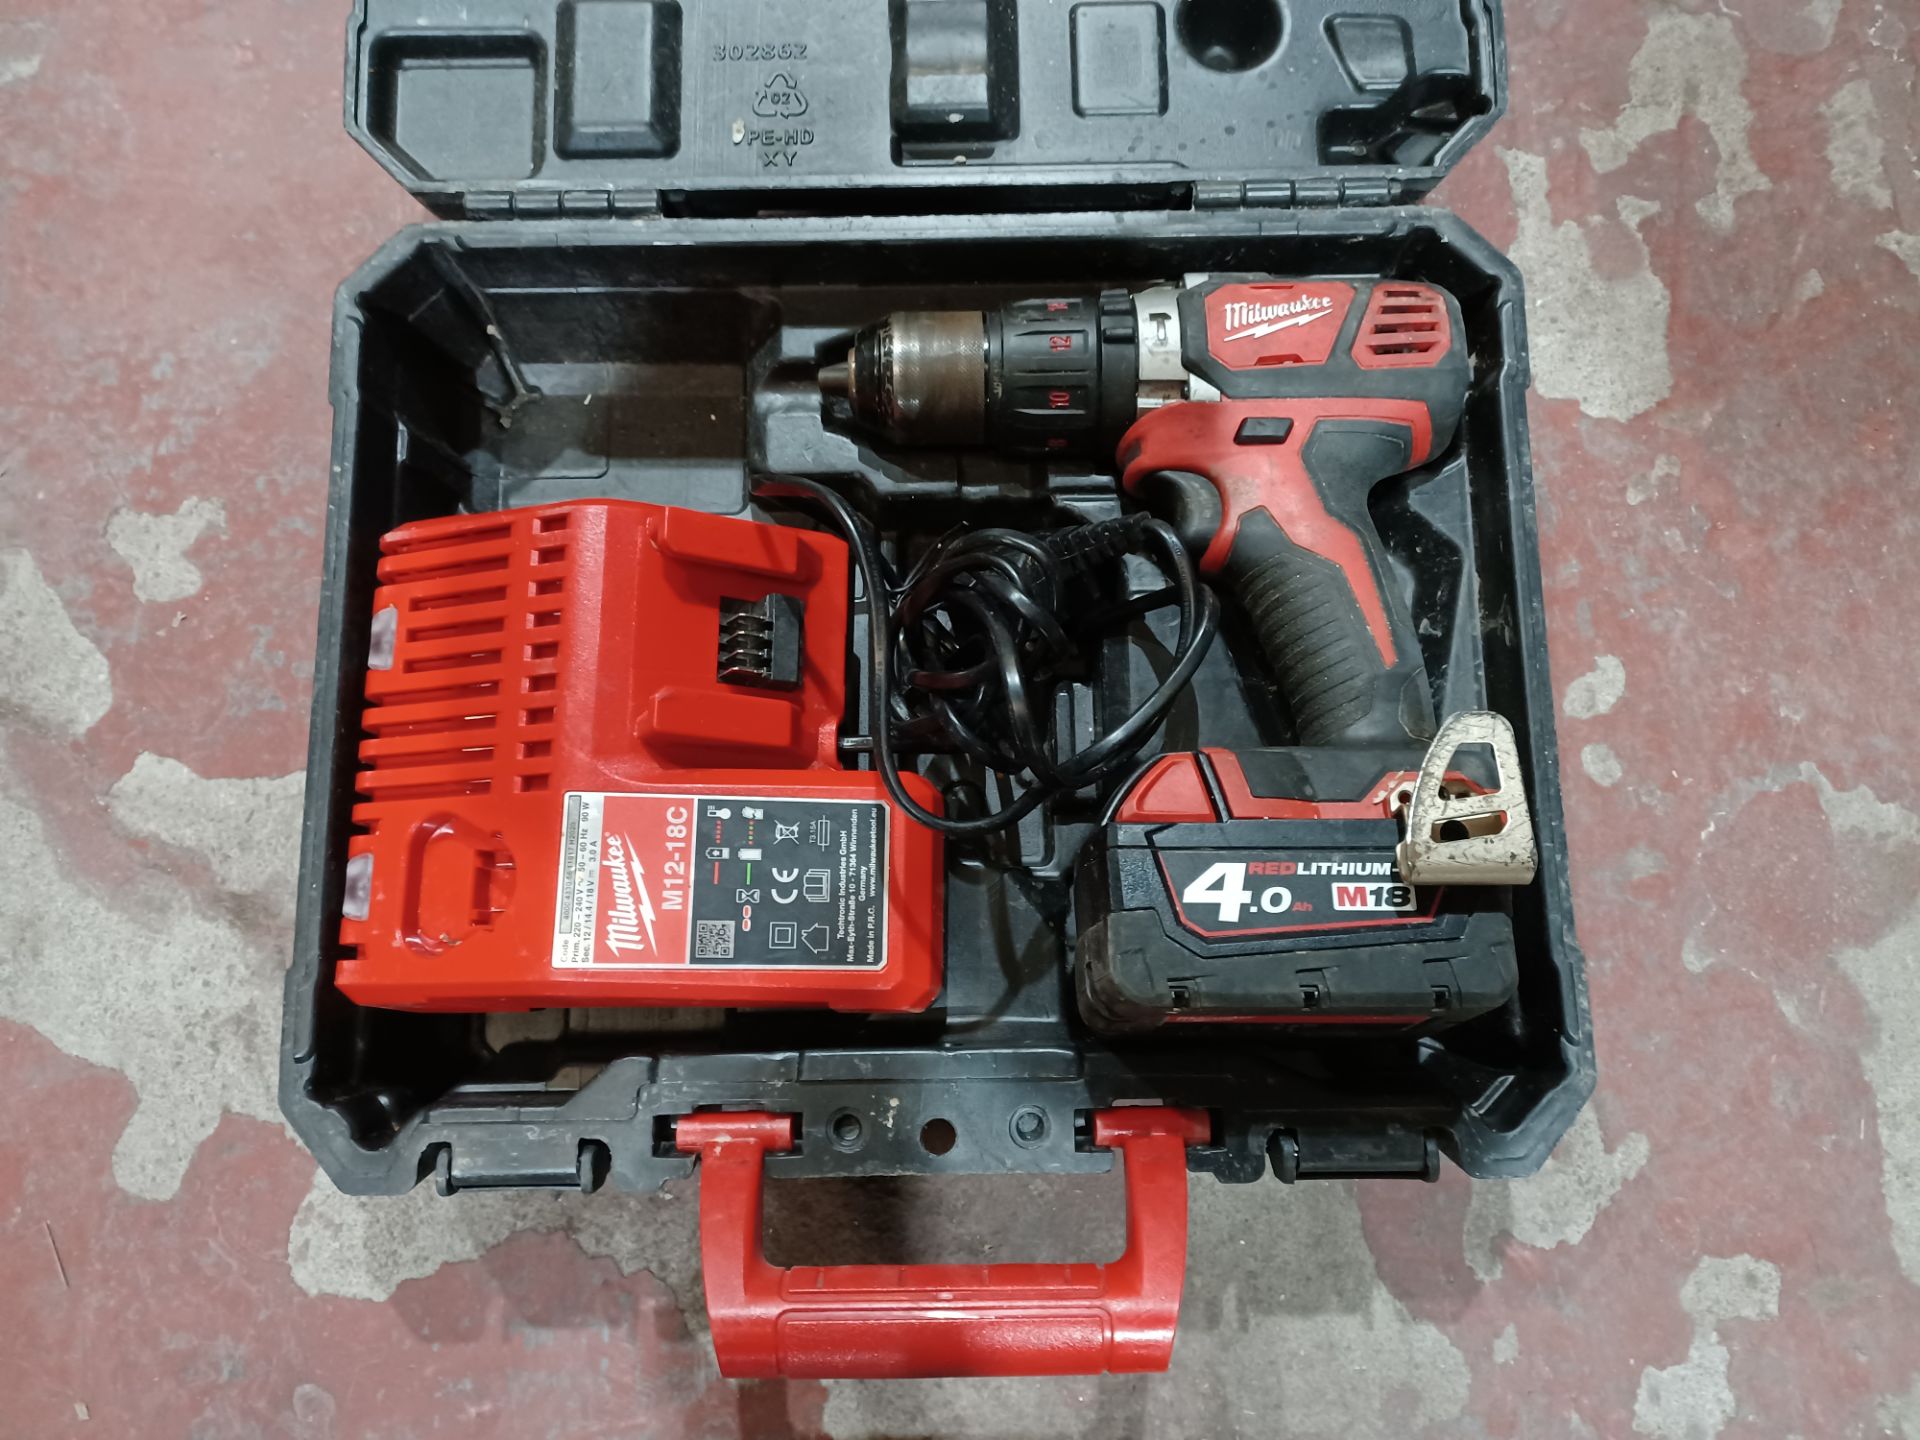 MILWAUKEE M18 BPDN-402C 18V 4.0AH LI-ION REDLITHIUM CORDLESS COMBI DRILL WITH BATTERY CHARGER AND